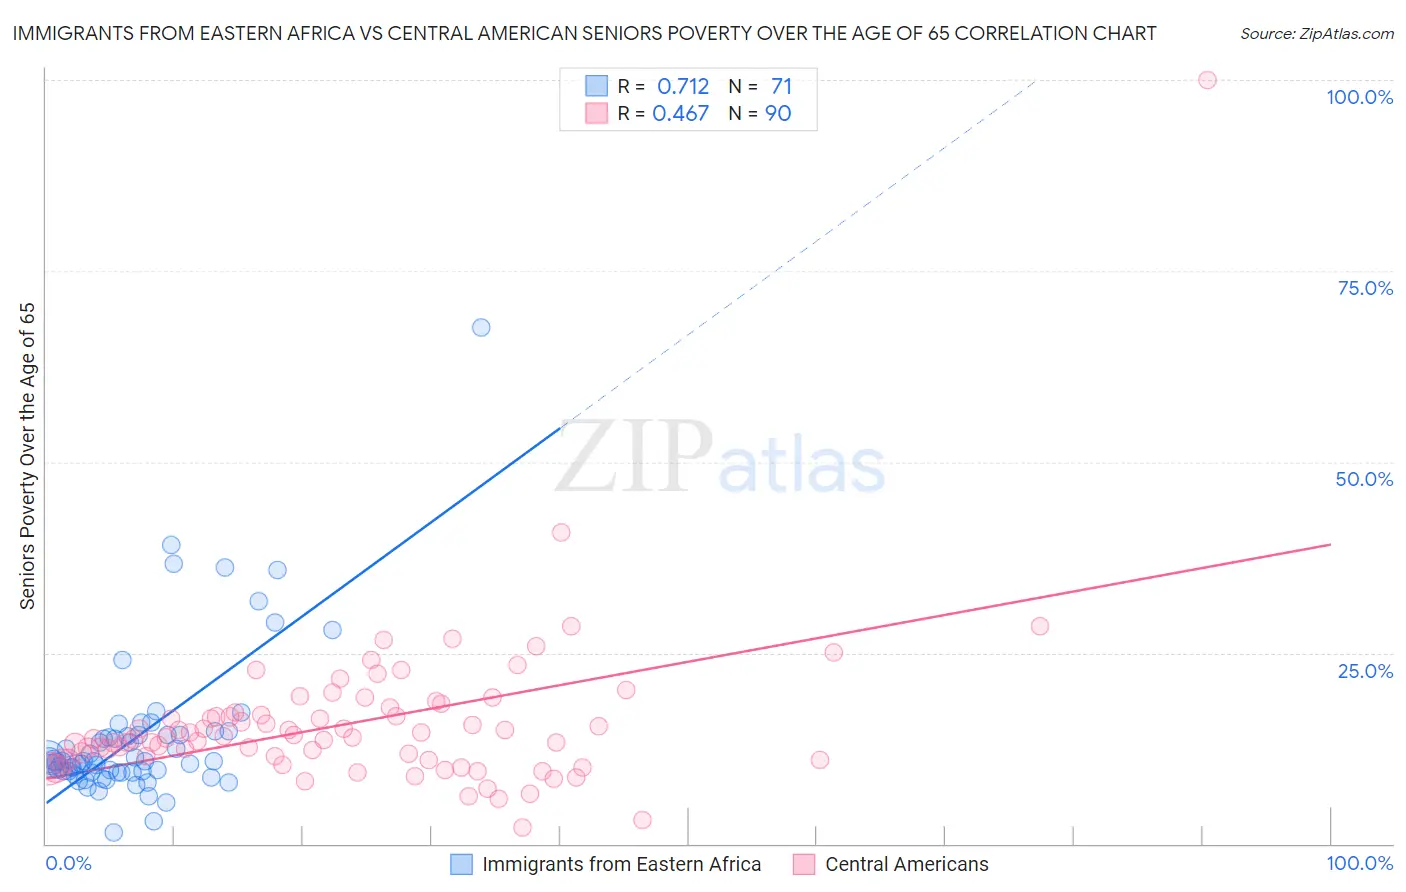 Immigrants from Eastern Africa vs Central American Seniors Poverty Over the Age of 65